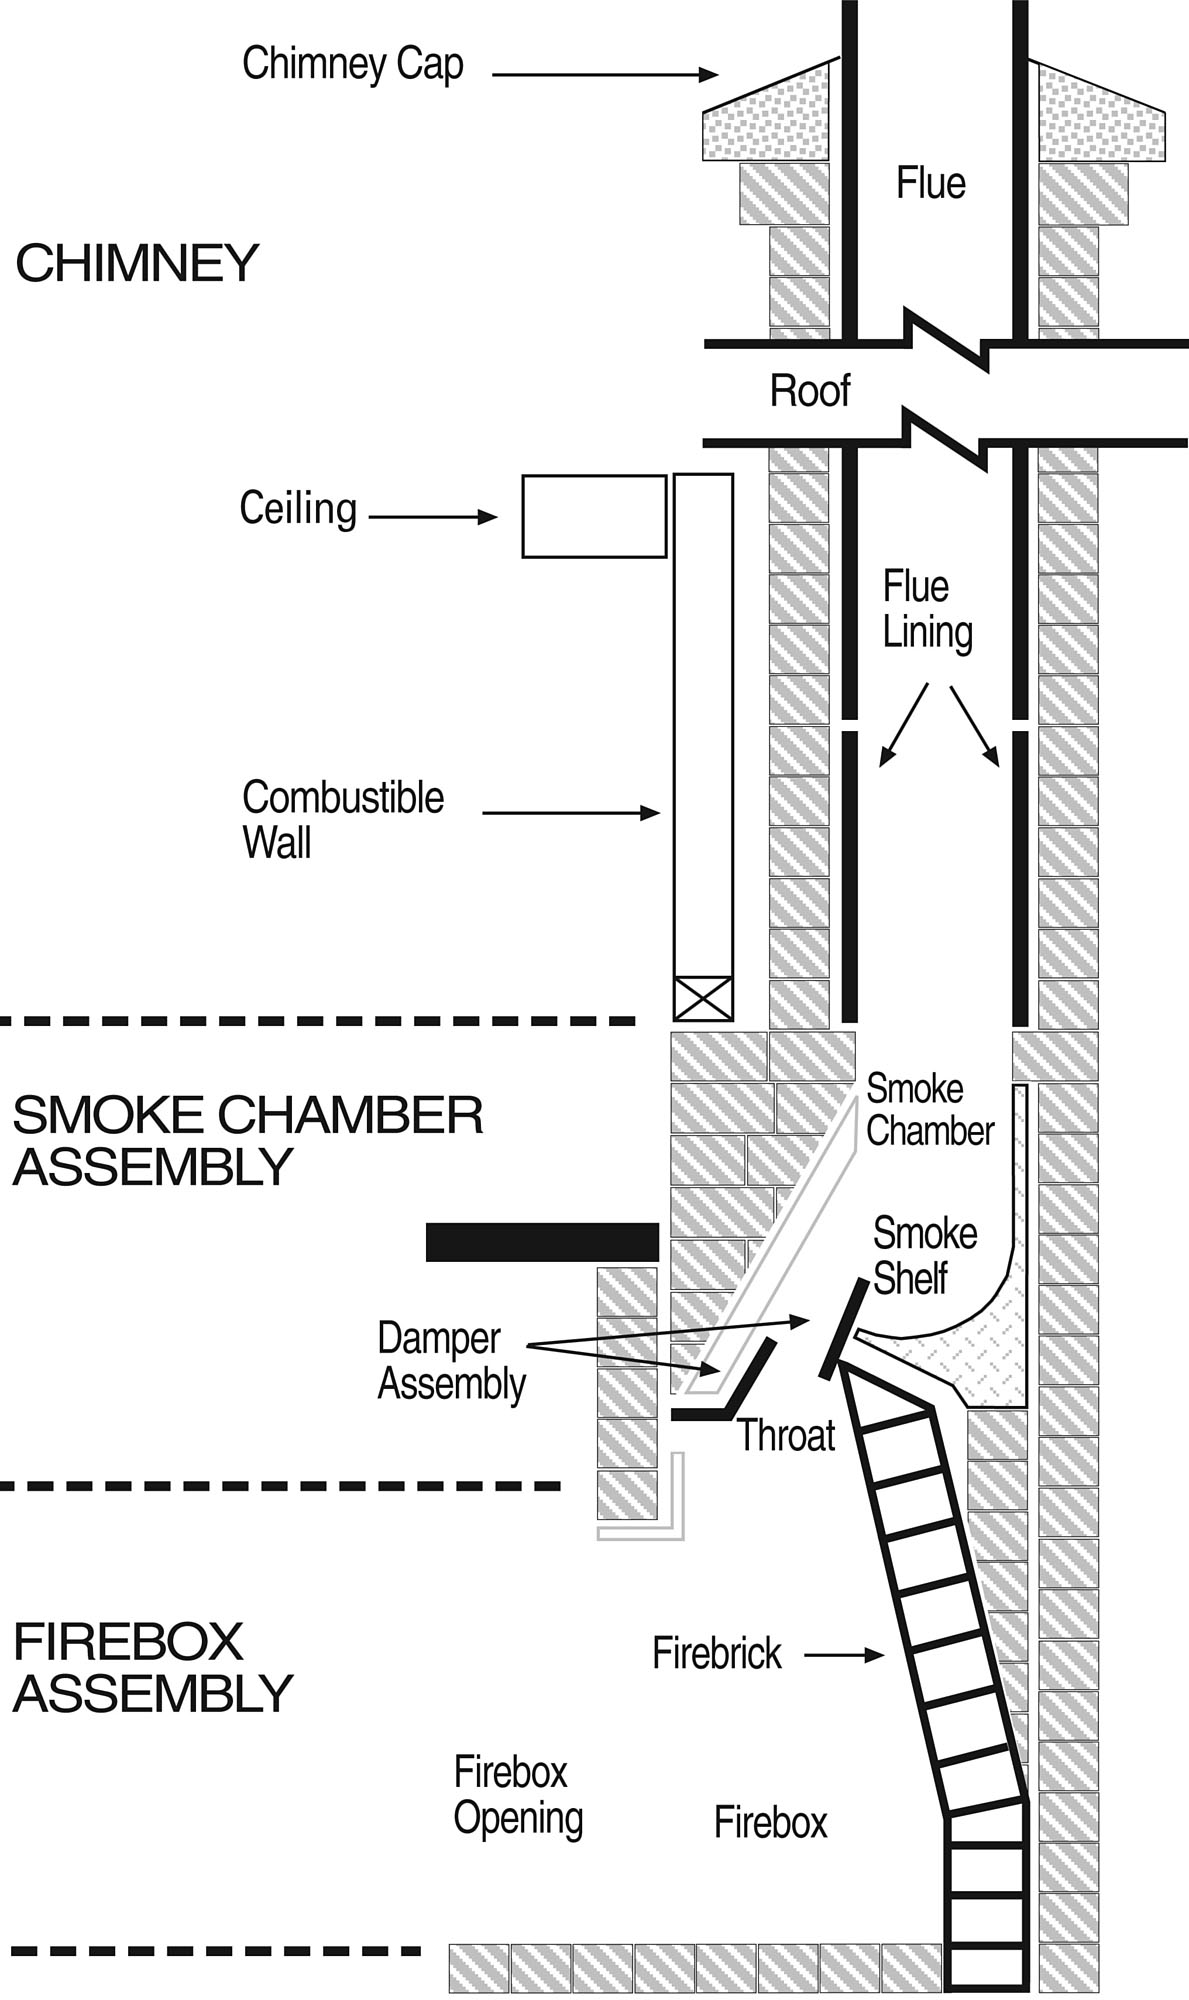 Here's what the inside of a fireplace and chimney look like.